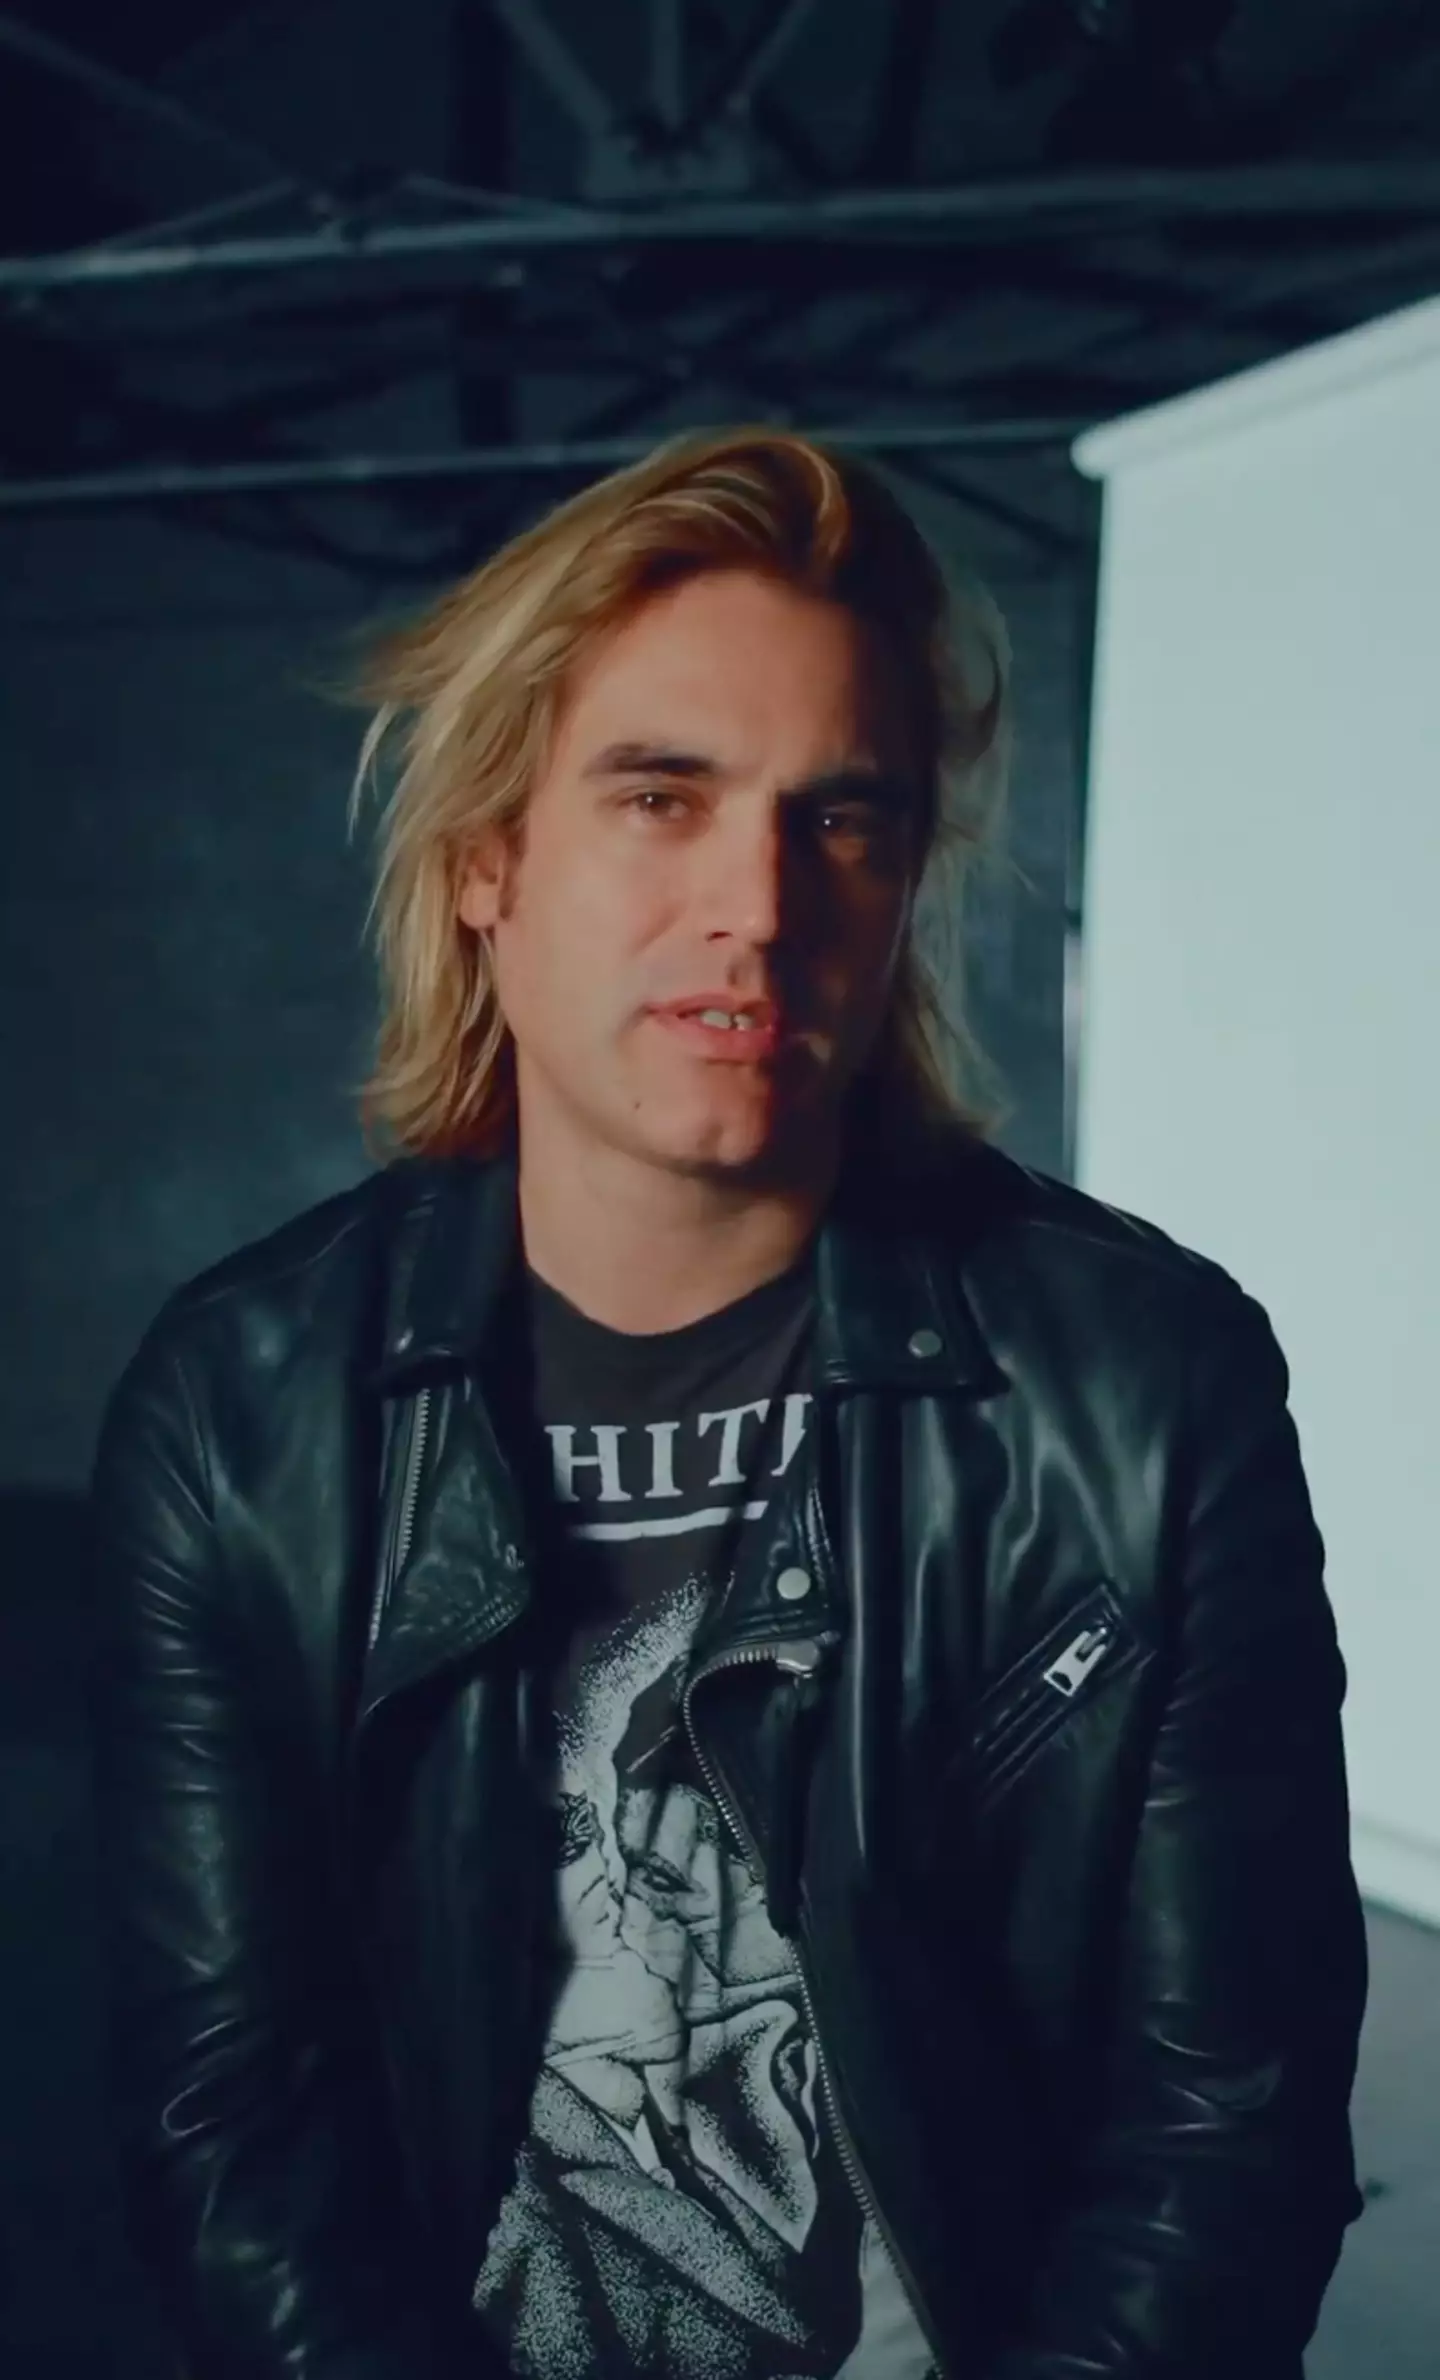 Charlie Simpson gushed about Busted's legacy.